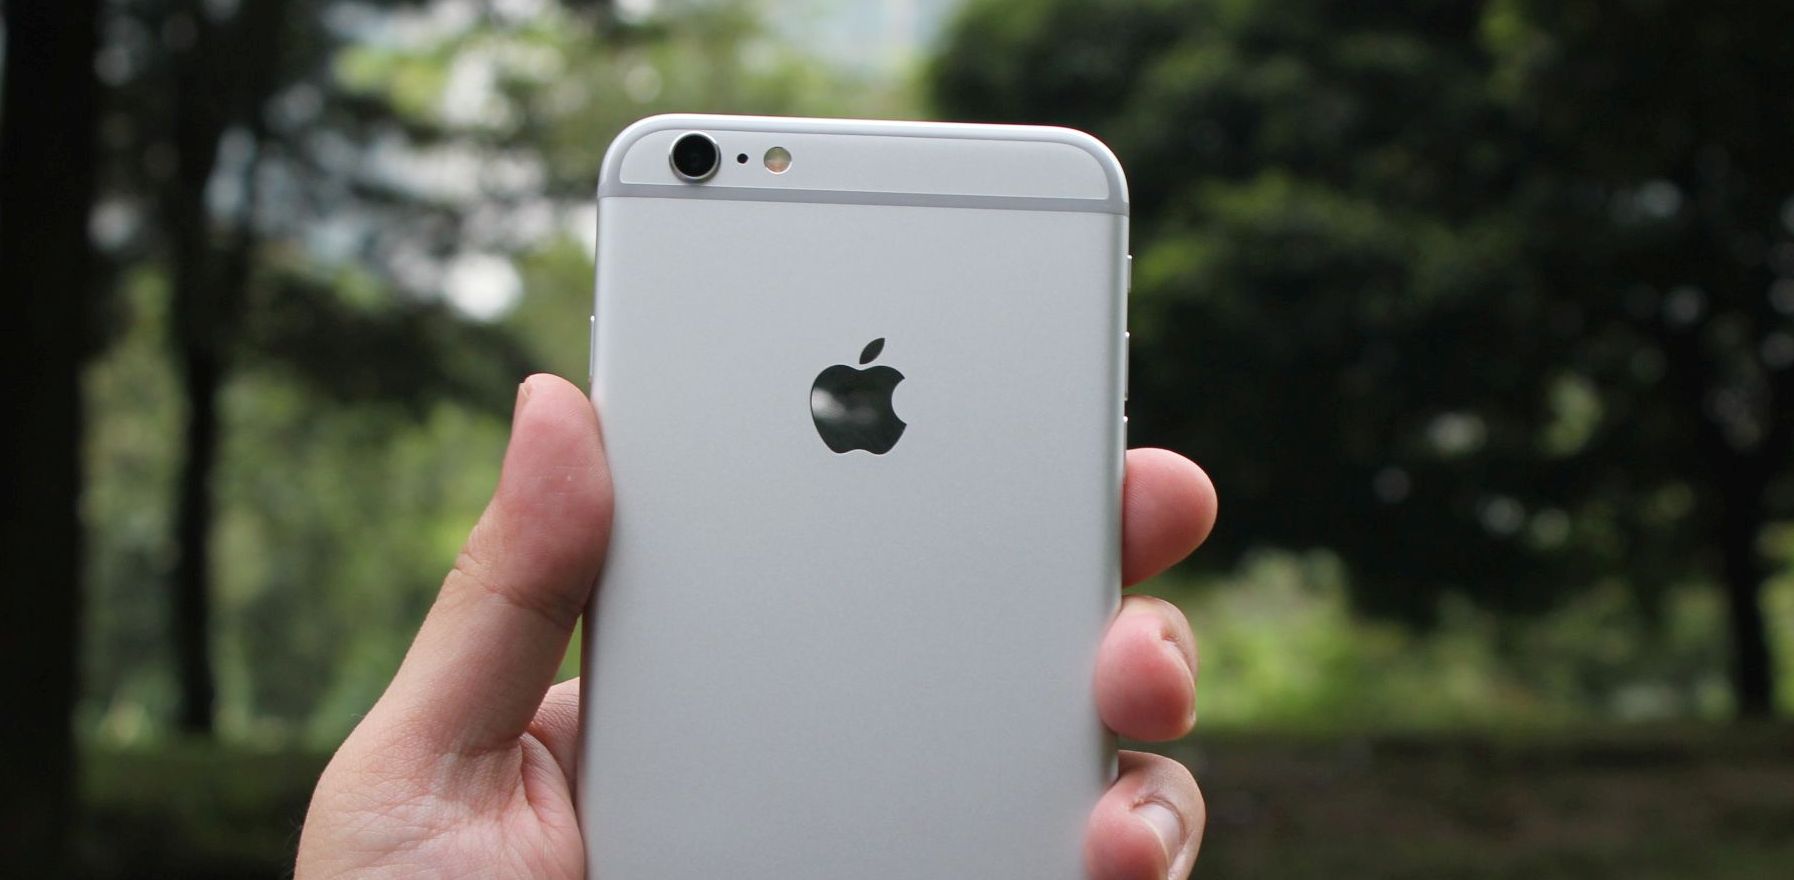 You can get an iPhone 6S for RM800 and deals on other iPhone models, iPad, MacBook and ...